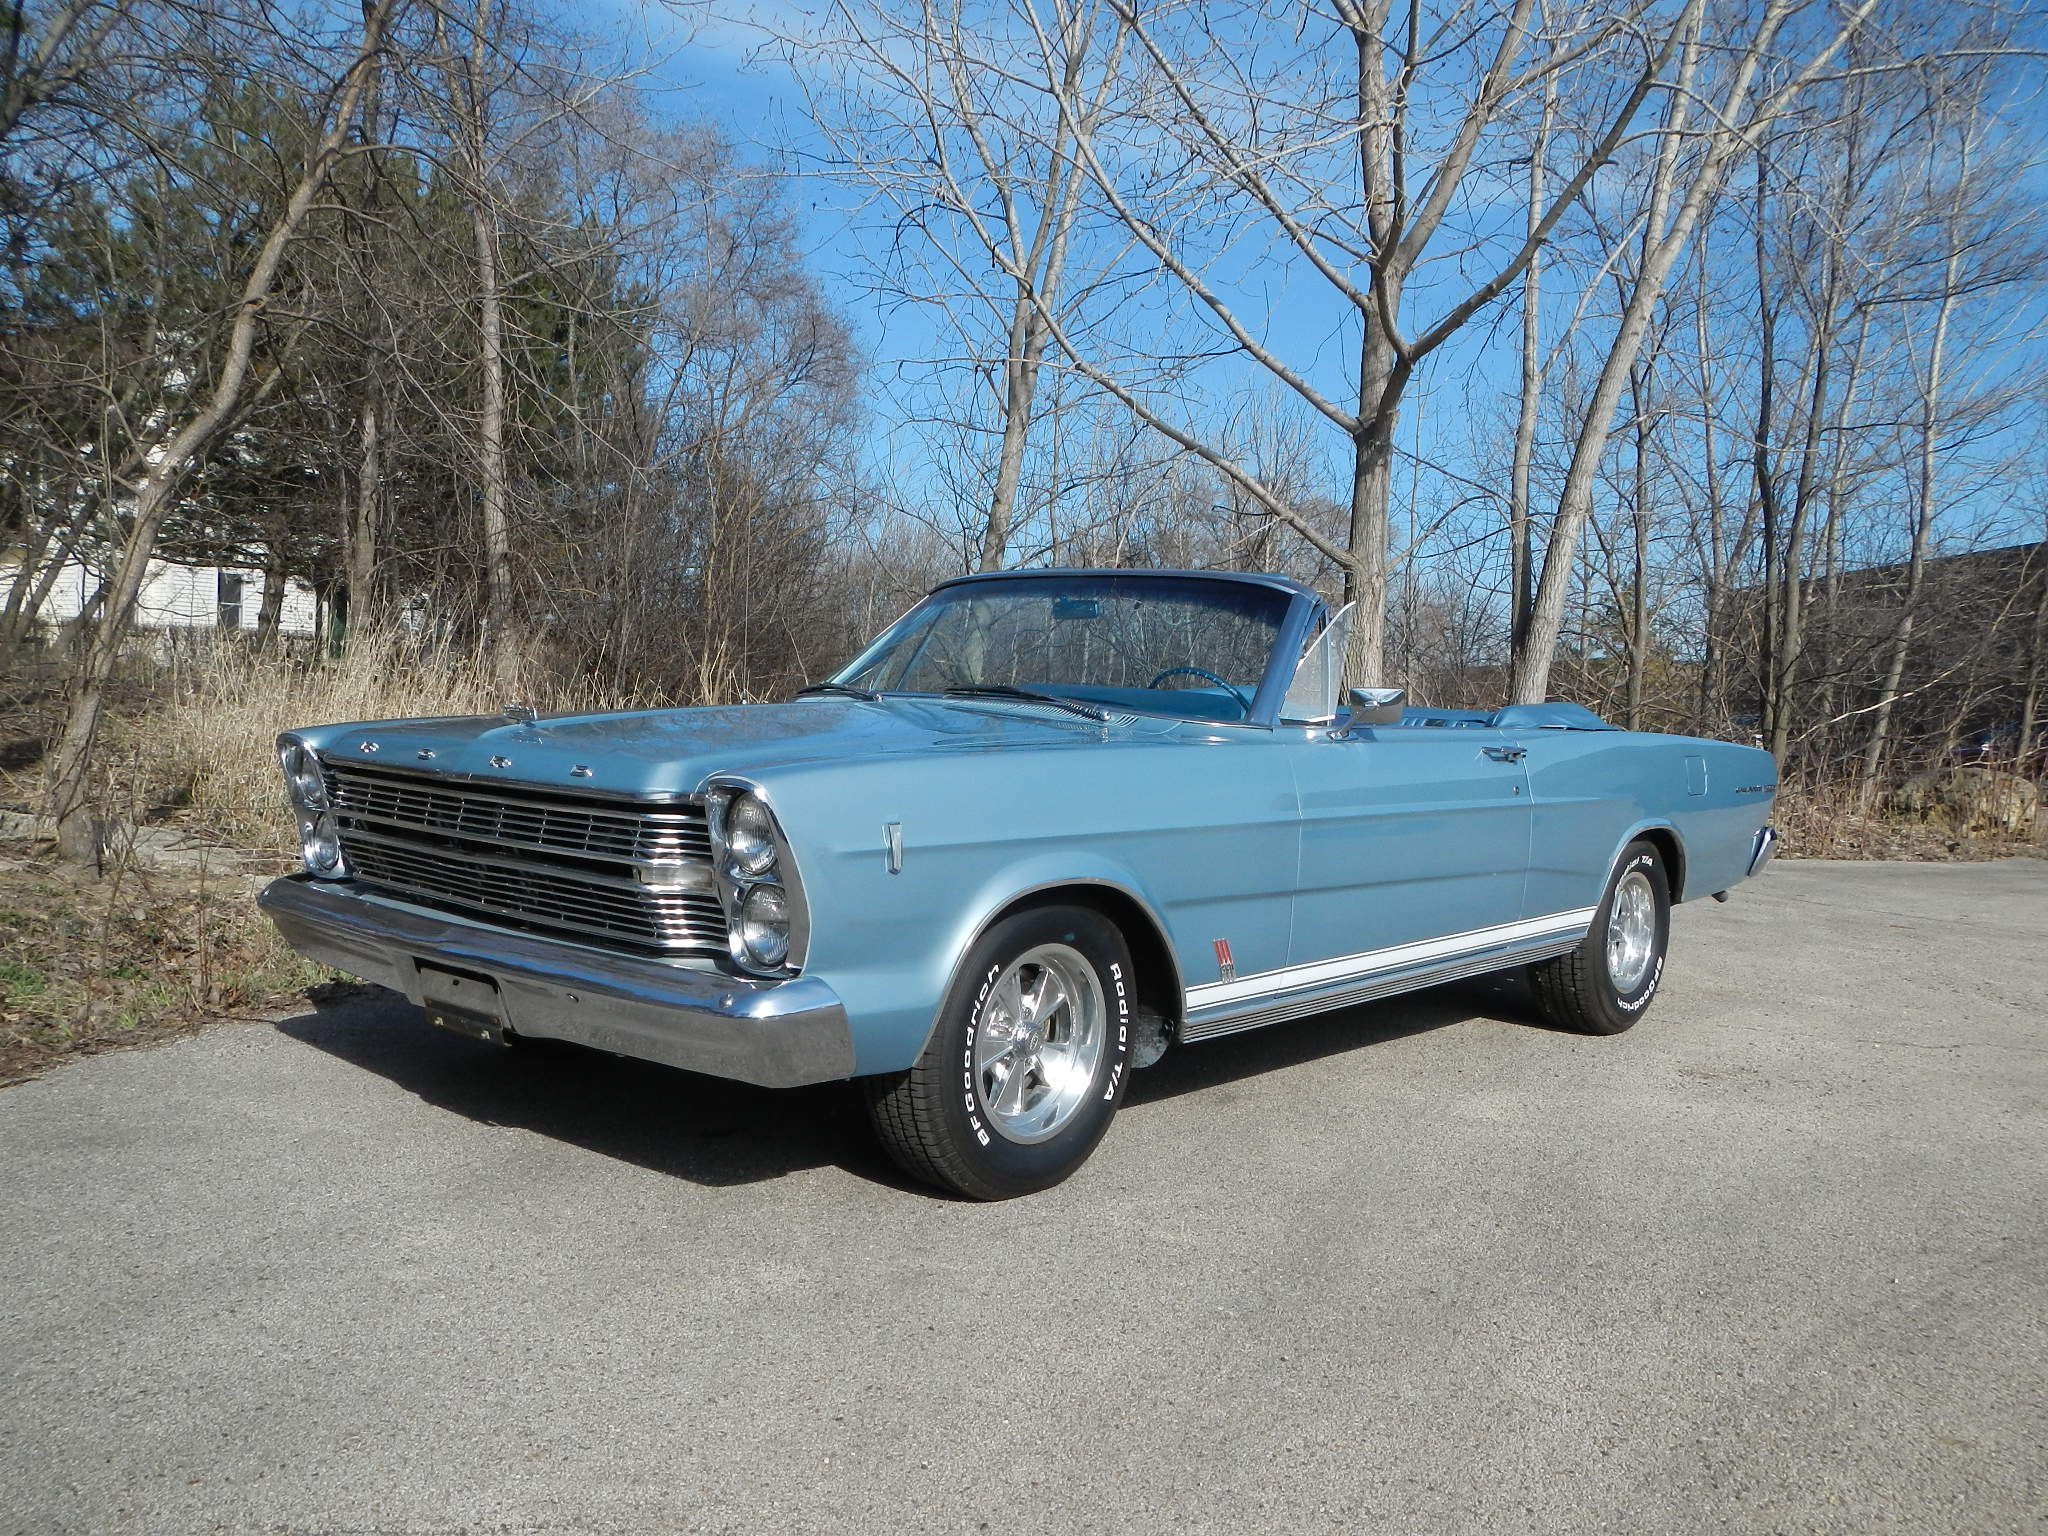 Ford Galaxie Convertible Classic Wallpaper Background